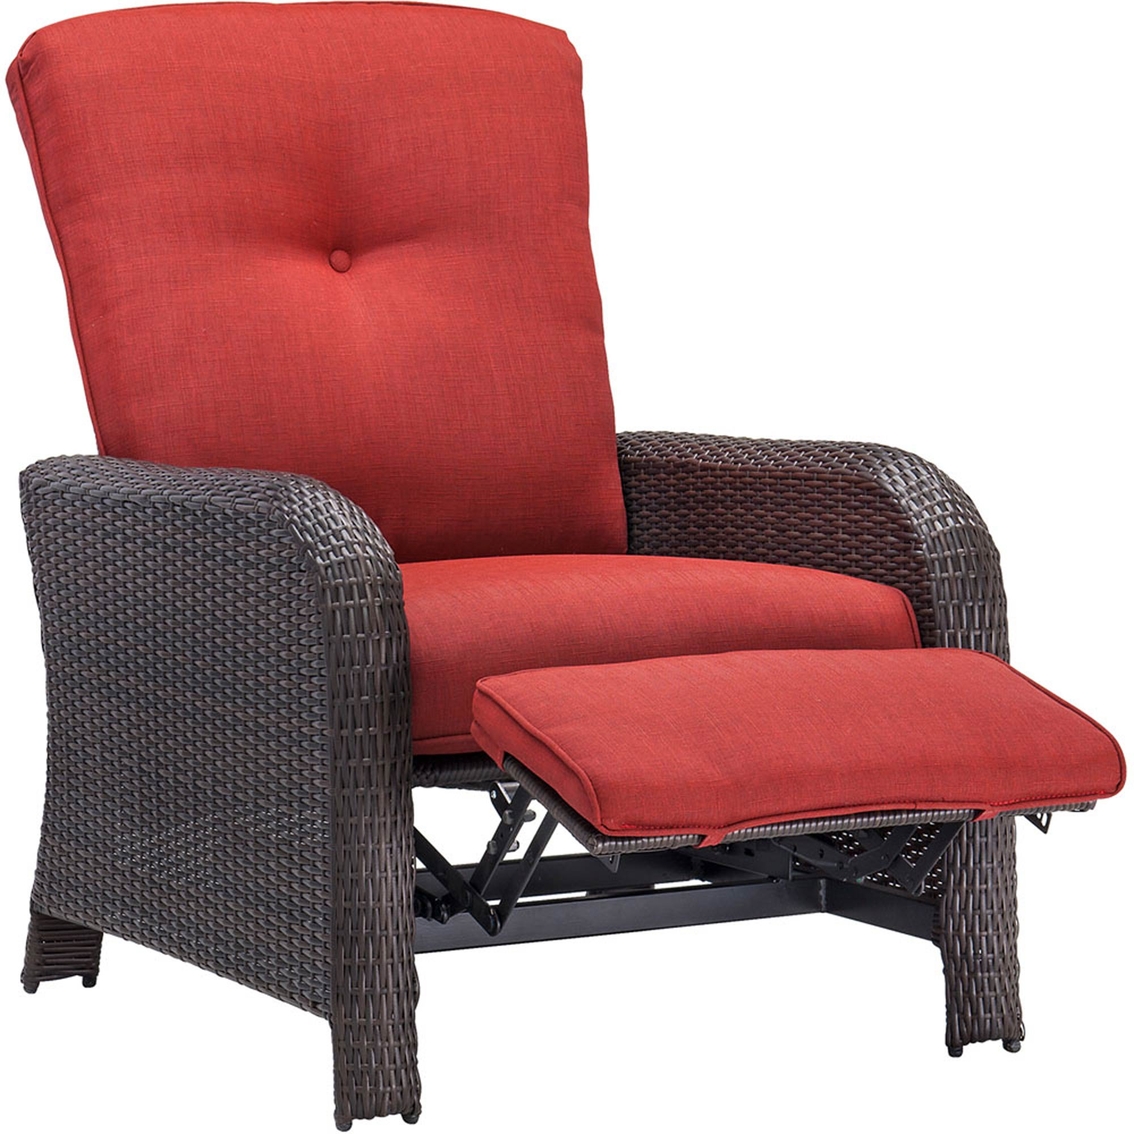 Hanover Strathmere Outdoor Reclining Arm Chair - Image 2 of 3